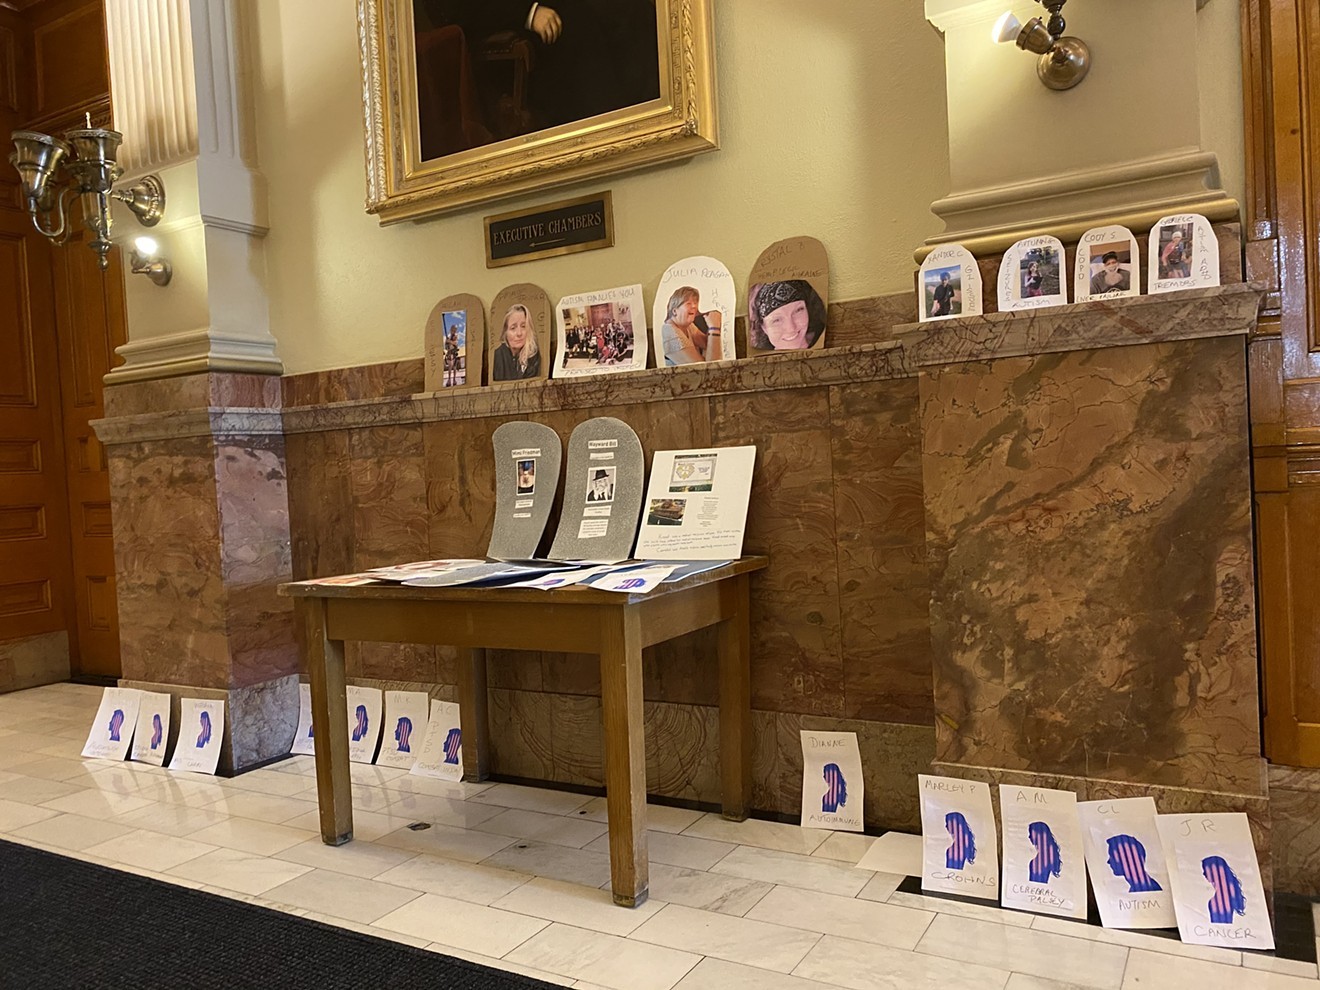 Cards and cardboard gravestones with the faces and names of medical marijuana patients left outside Jared Polis's office.